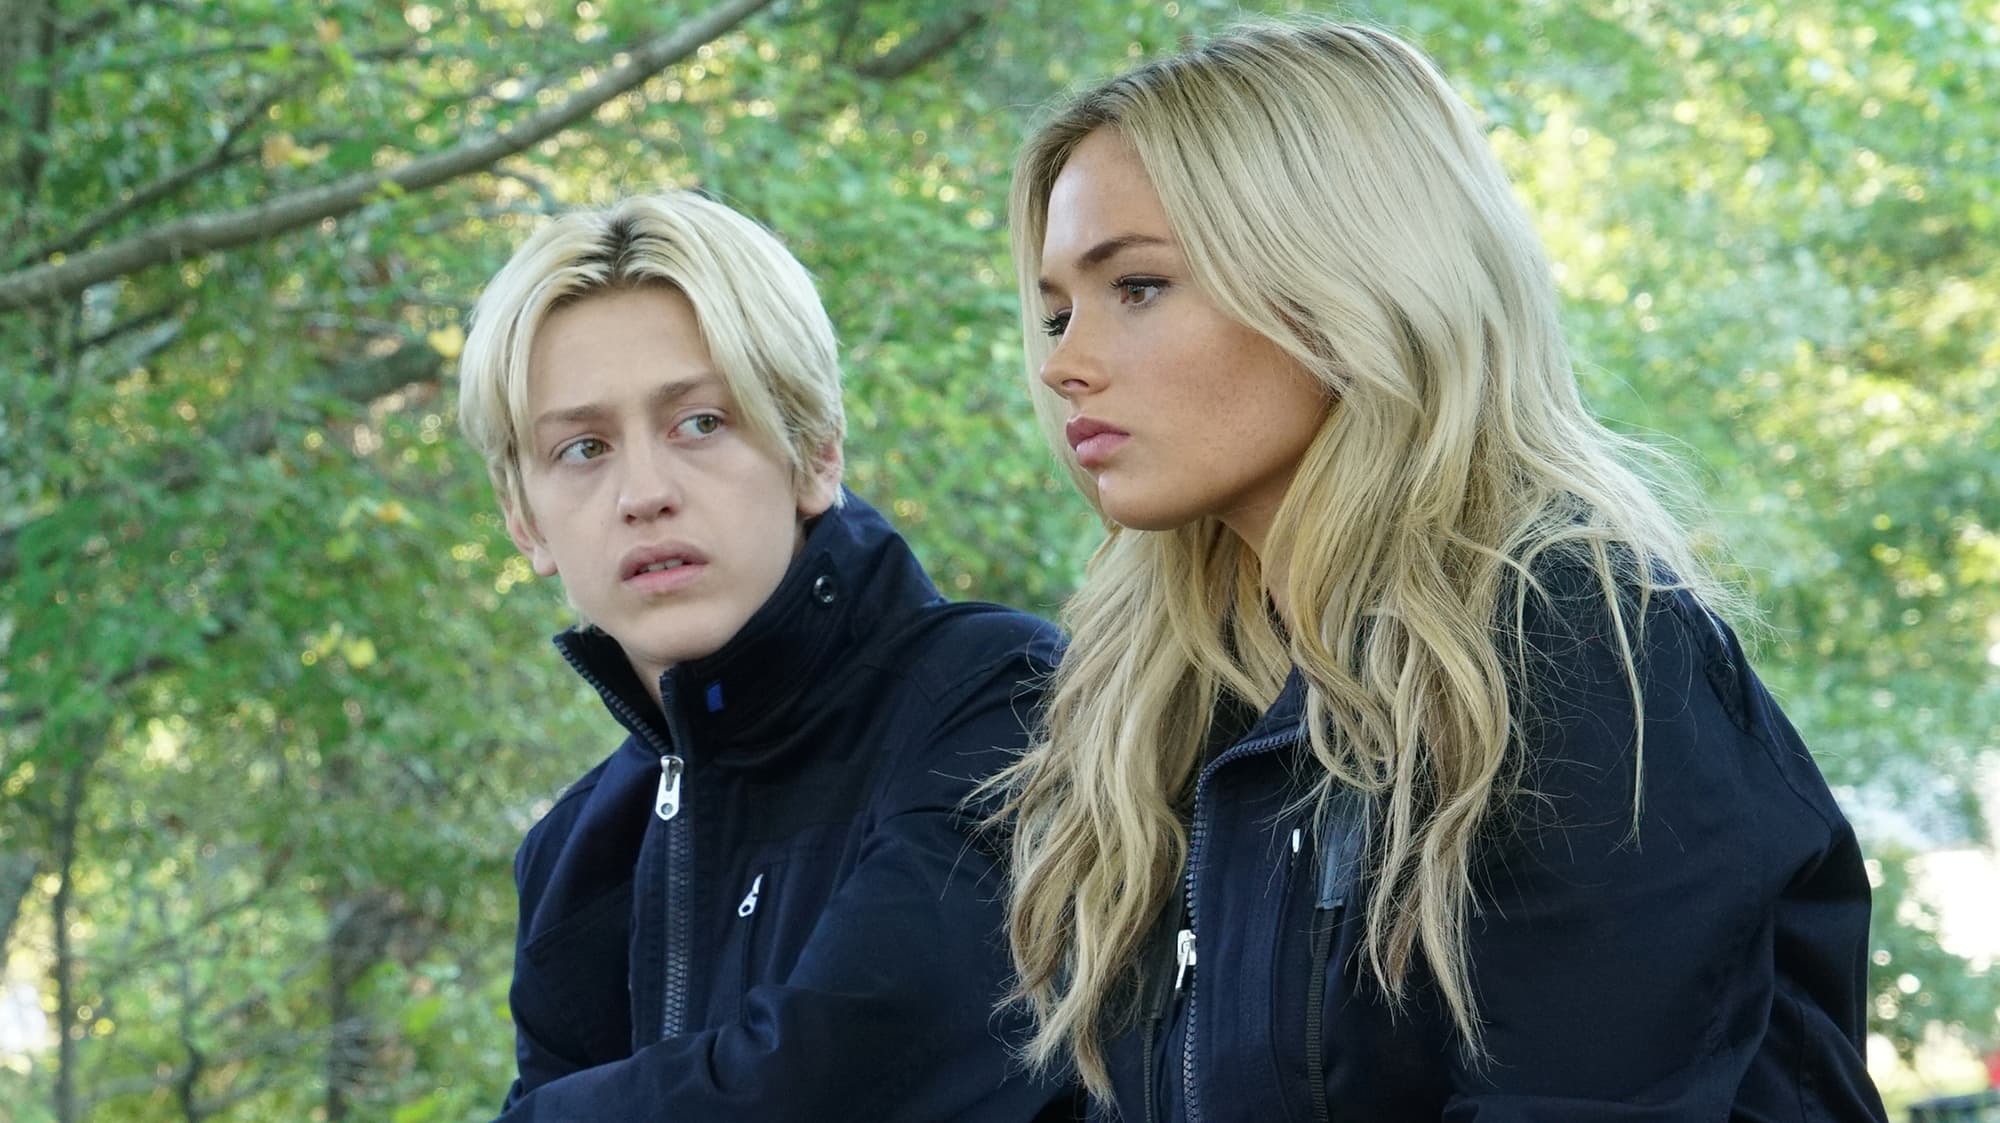 Percy Hynes White and Natalie Alyn Lind in "The Gifted"